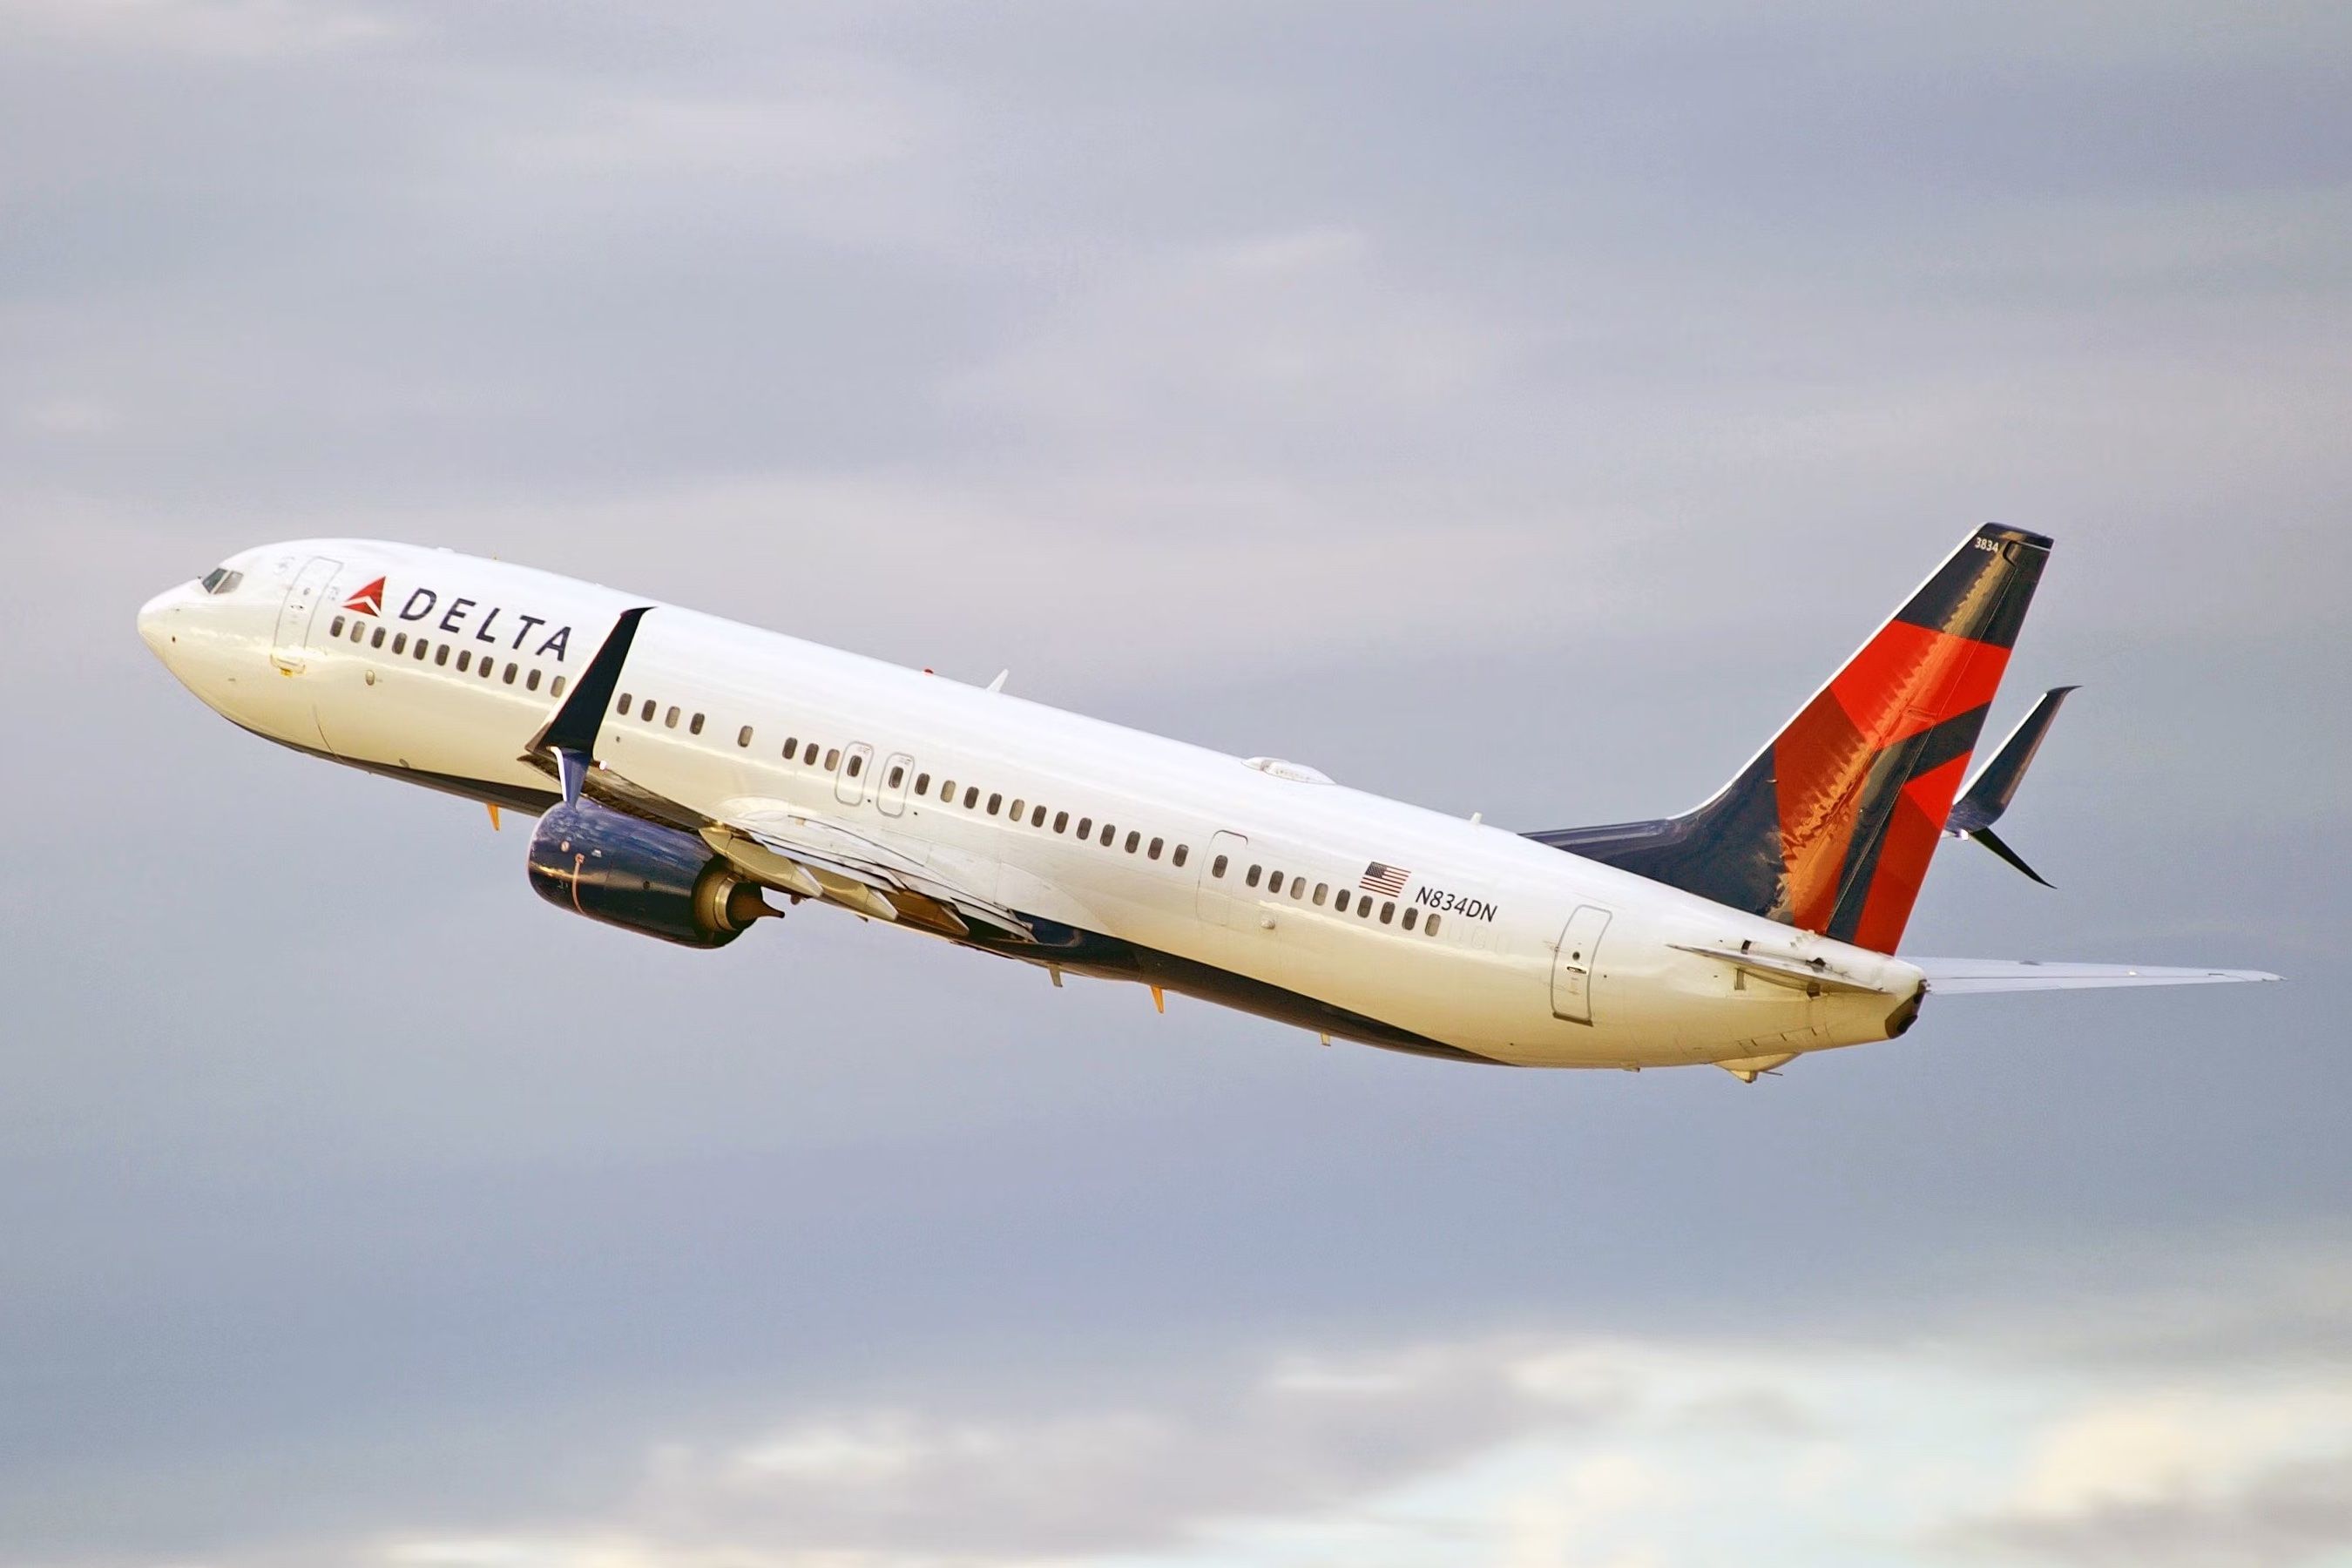 A Delta Air Lines Boeing 737-900ER flying in the sky.